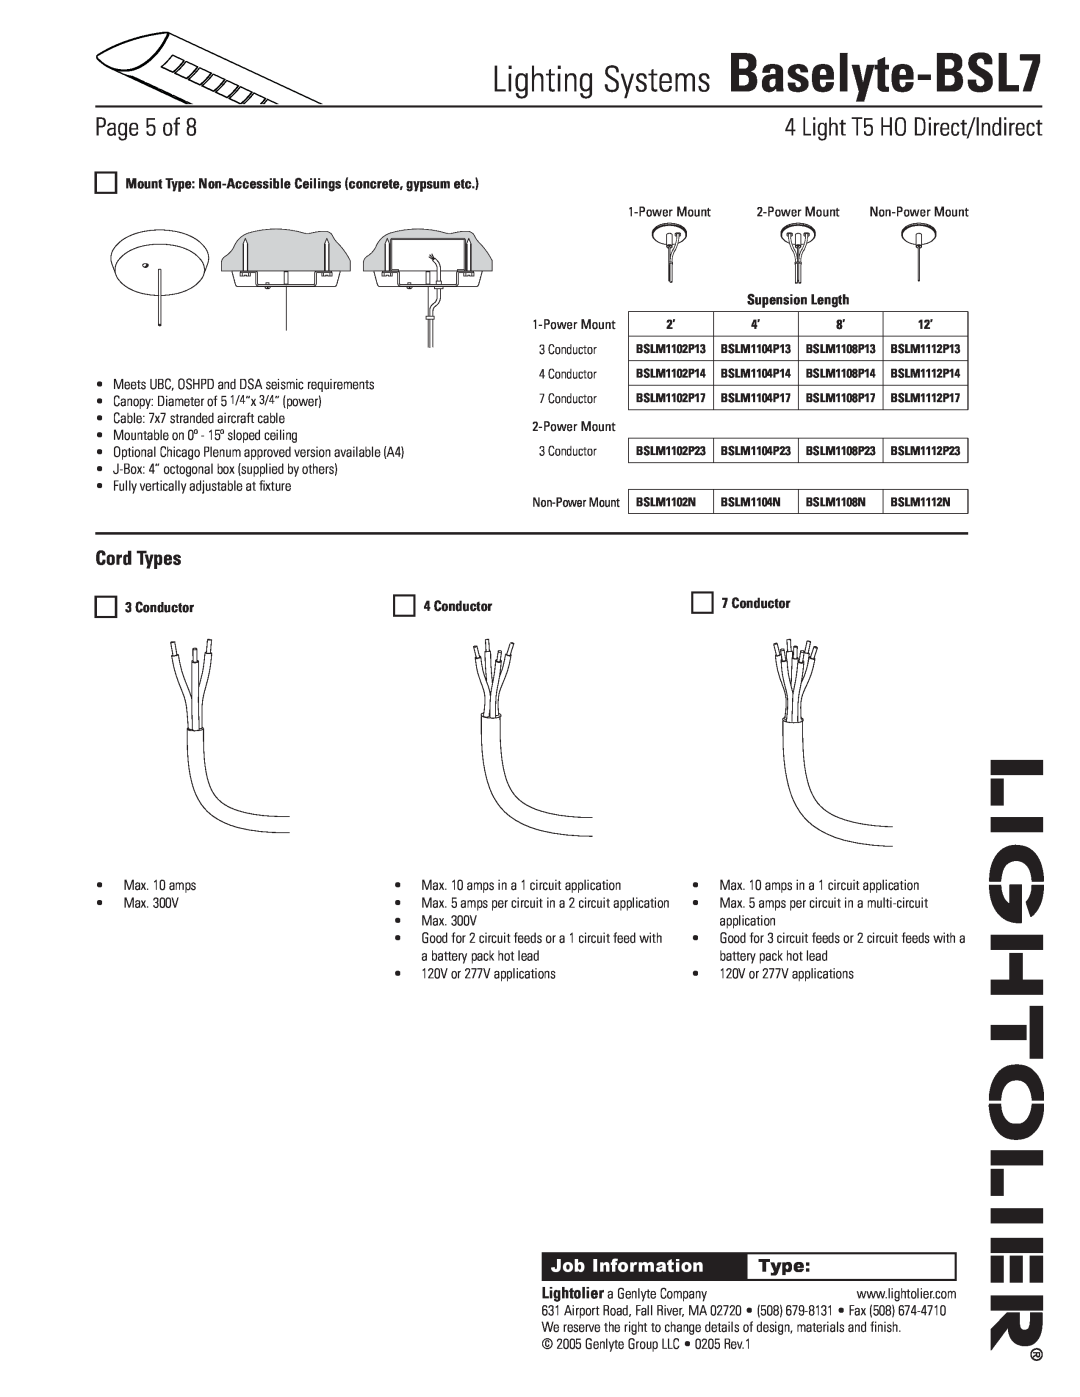 Lightolier Cord Types, Conductor, Lighting Systems Baselyte-BSL7, Page of, Light T5 HO Direct/Indirect, Job Information 